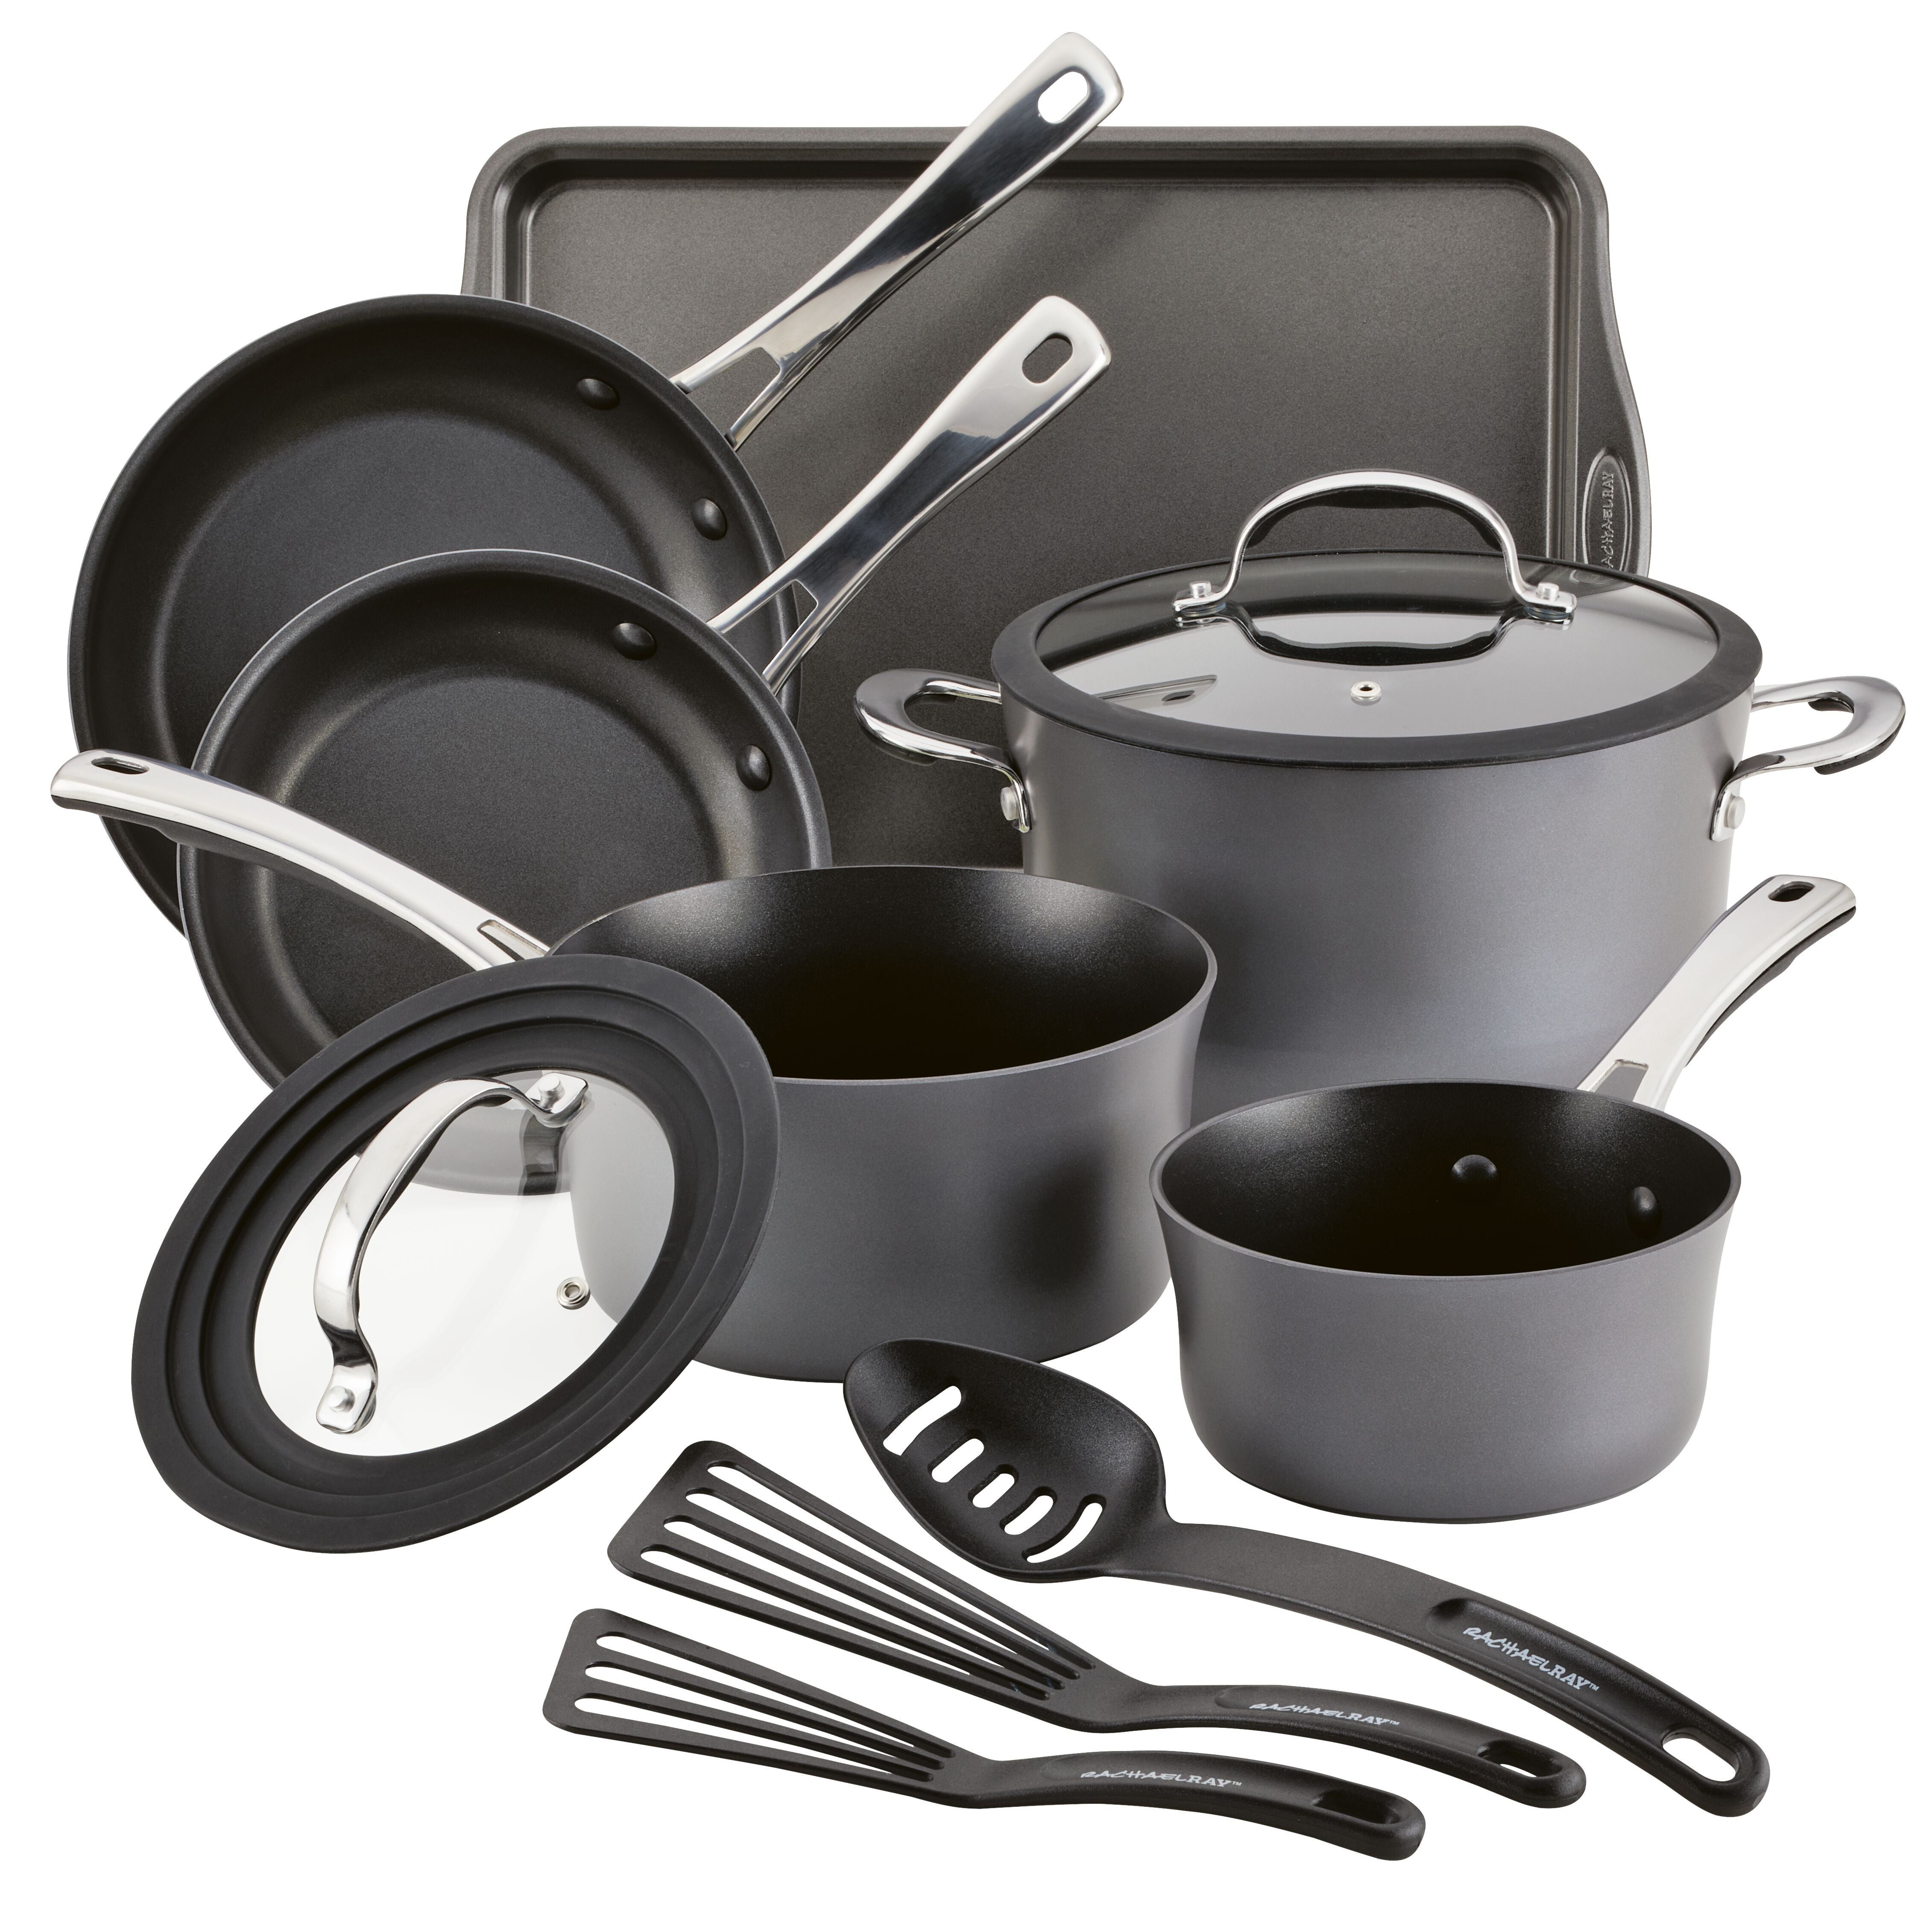 Cook + Create 11pc Hard Anodized Nonstick Cookware Set Black